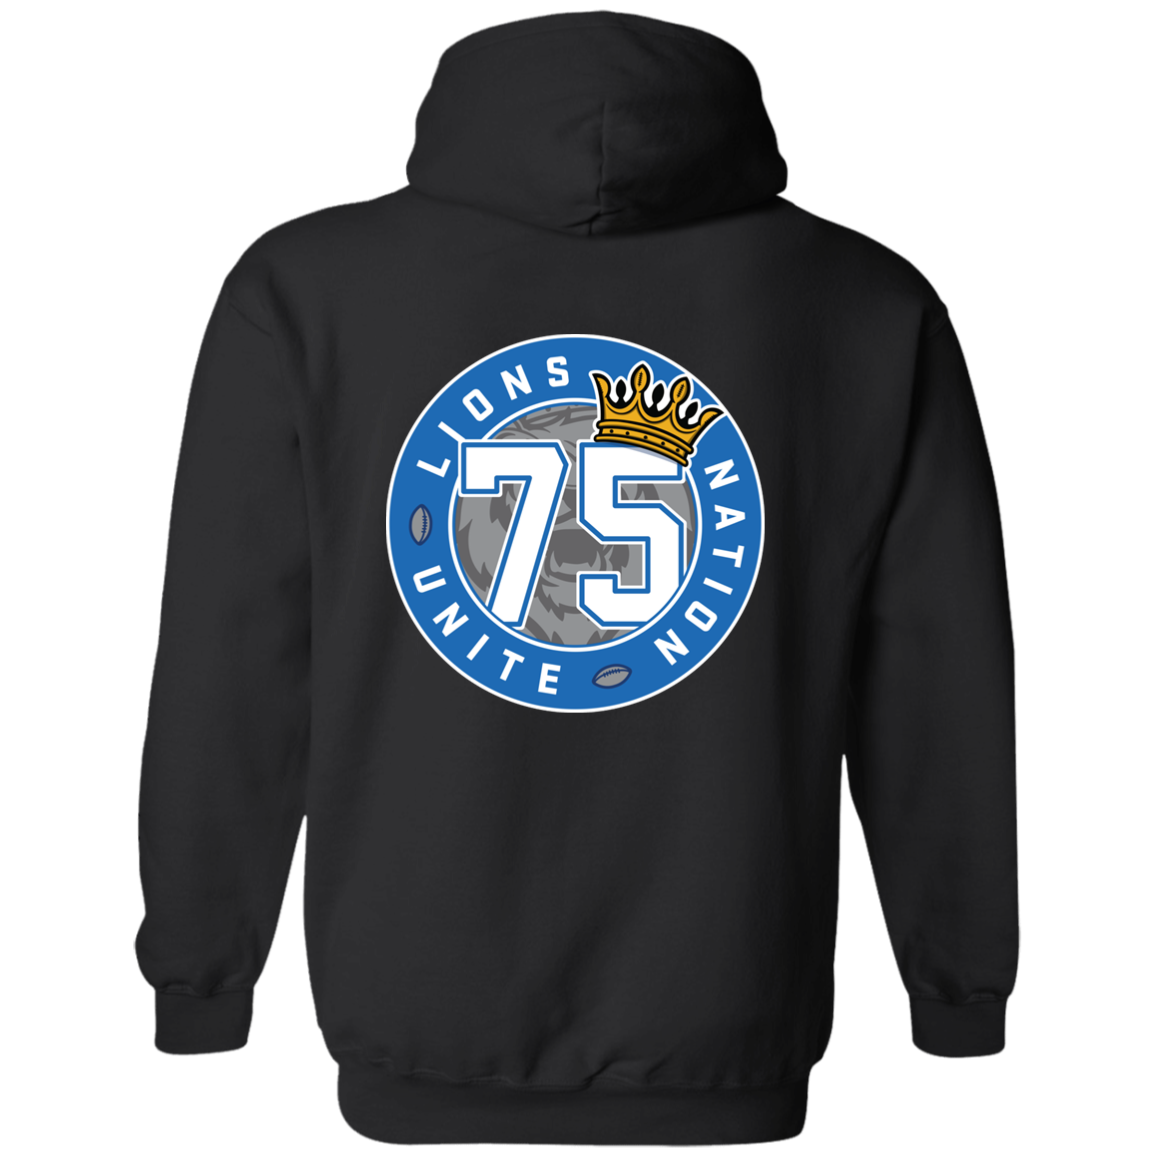 No. 75 - G185 Pullover Hoodie